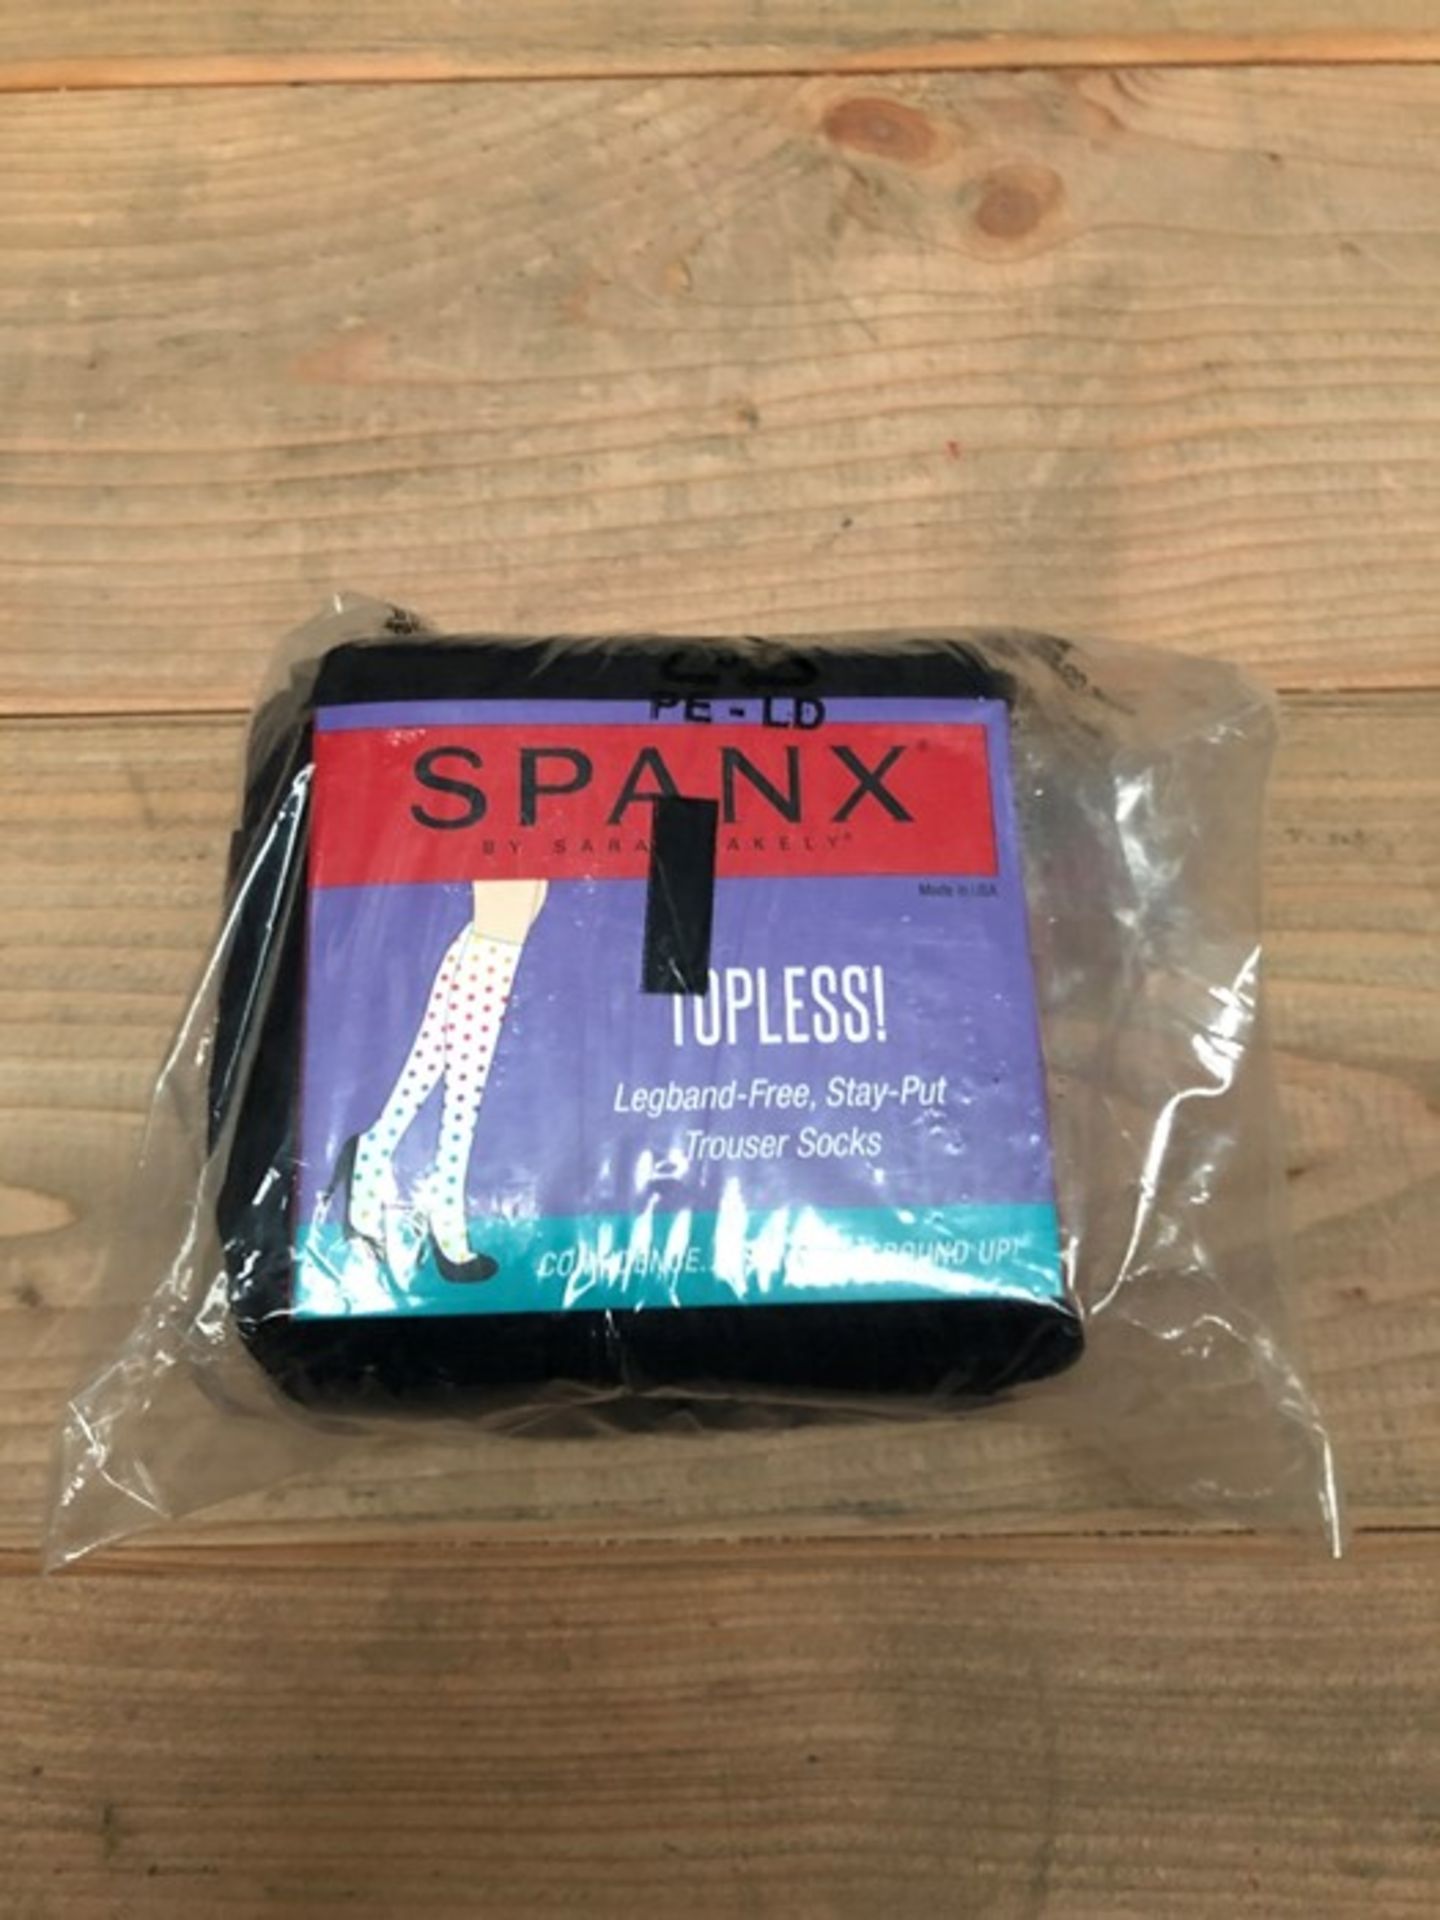 1 LOT TO CONTAIN 10 SPANX TOPLESS RIBBED TROUSER SOCKS IN BLACK RIB / SIZE FULLER CALF / STYLE